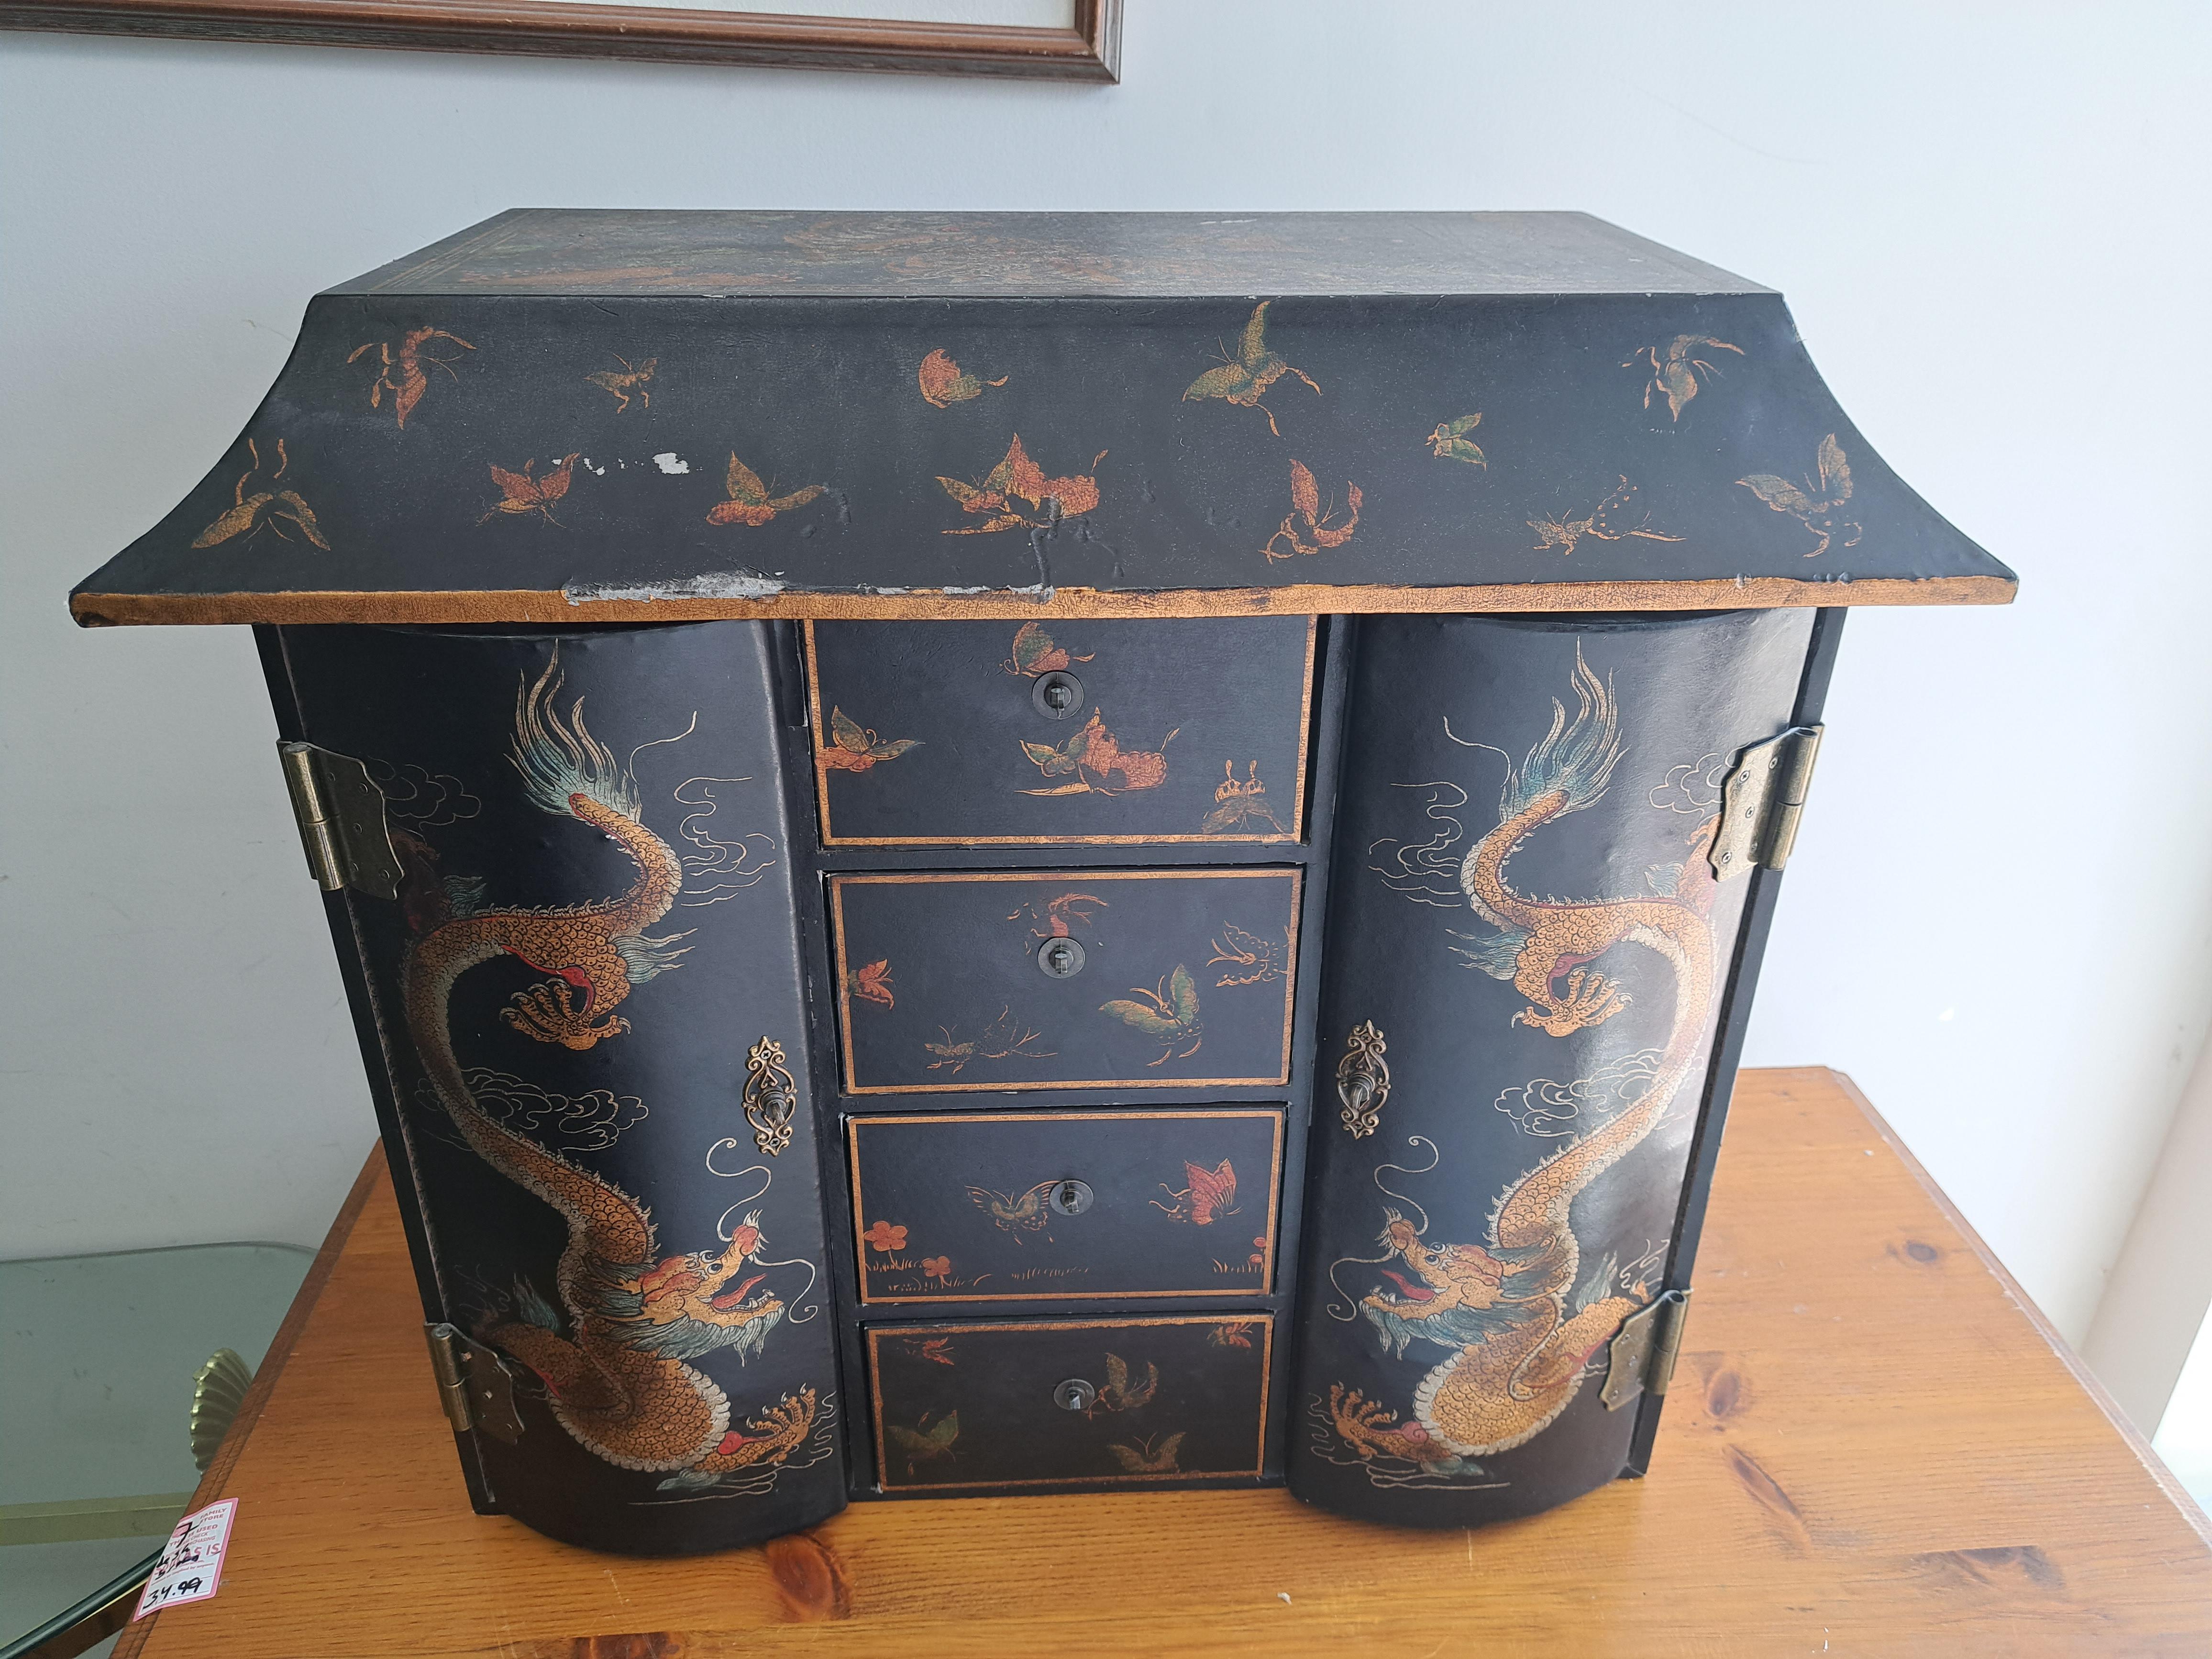 Antique Asian tea/apothecary  cabinet.. Pagoda shaped cabinet has two doors and four drawers. Wood with detailed brass fittings. Painted Chinoiserie black with gold and colored details such as dragons and flowers.